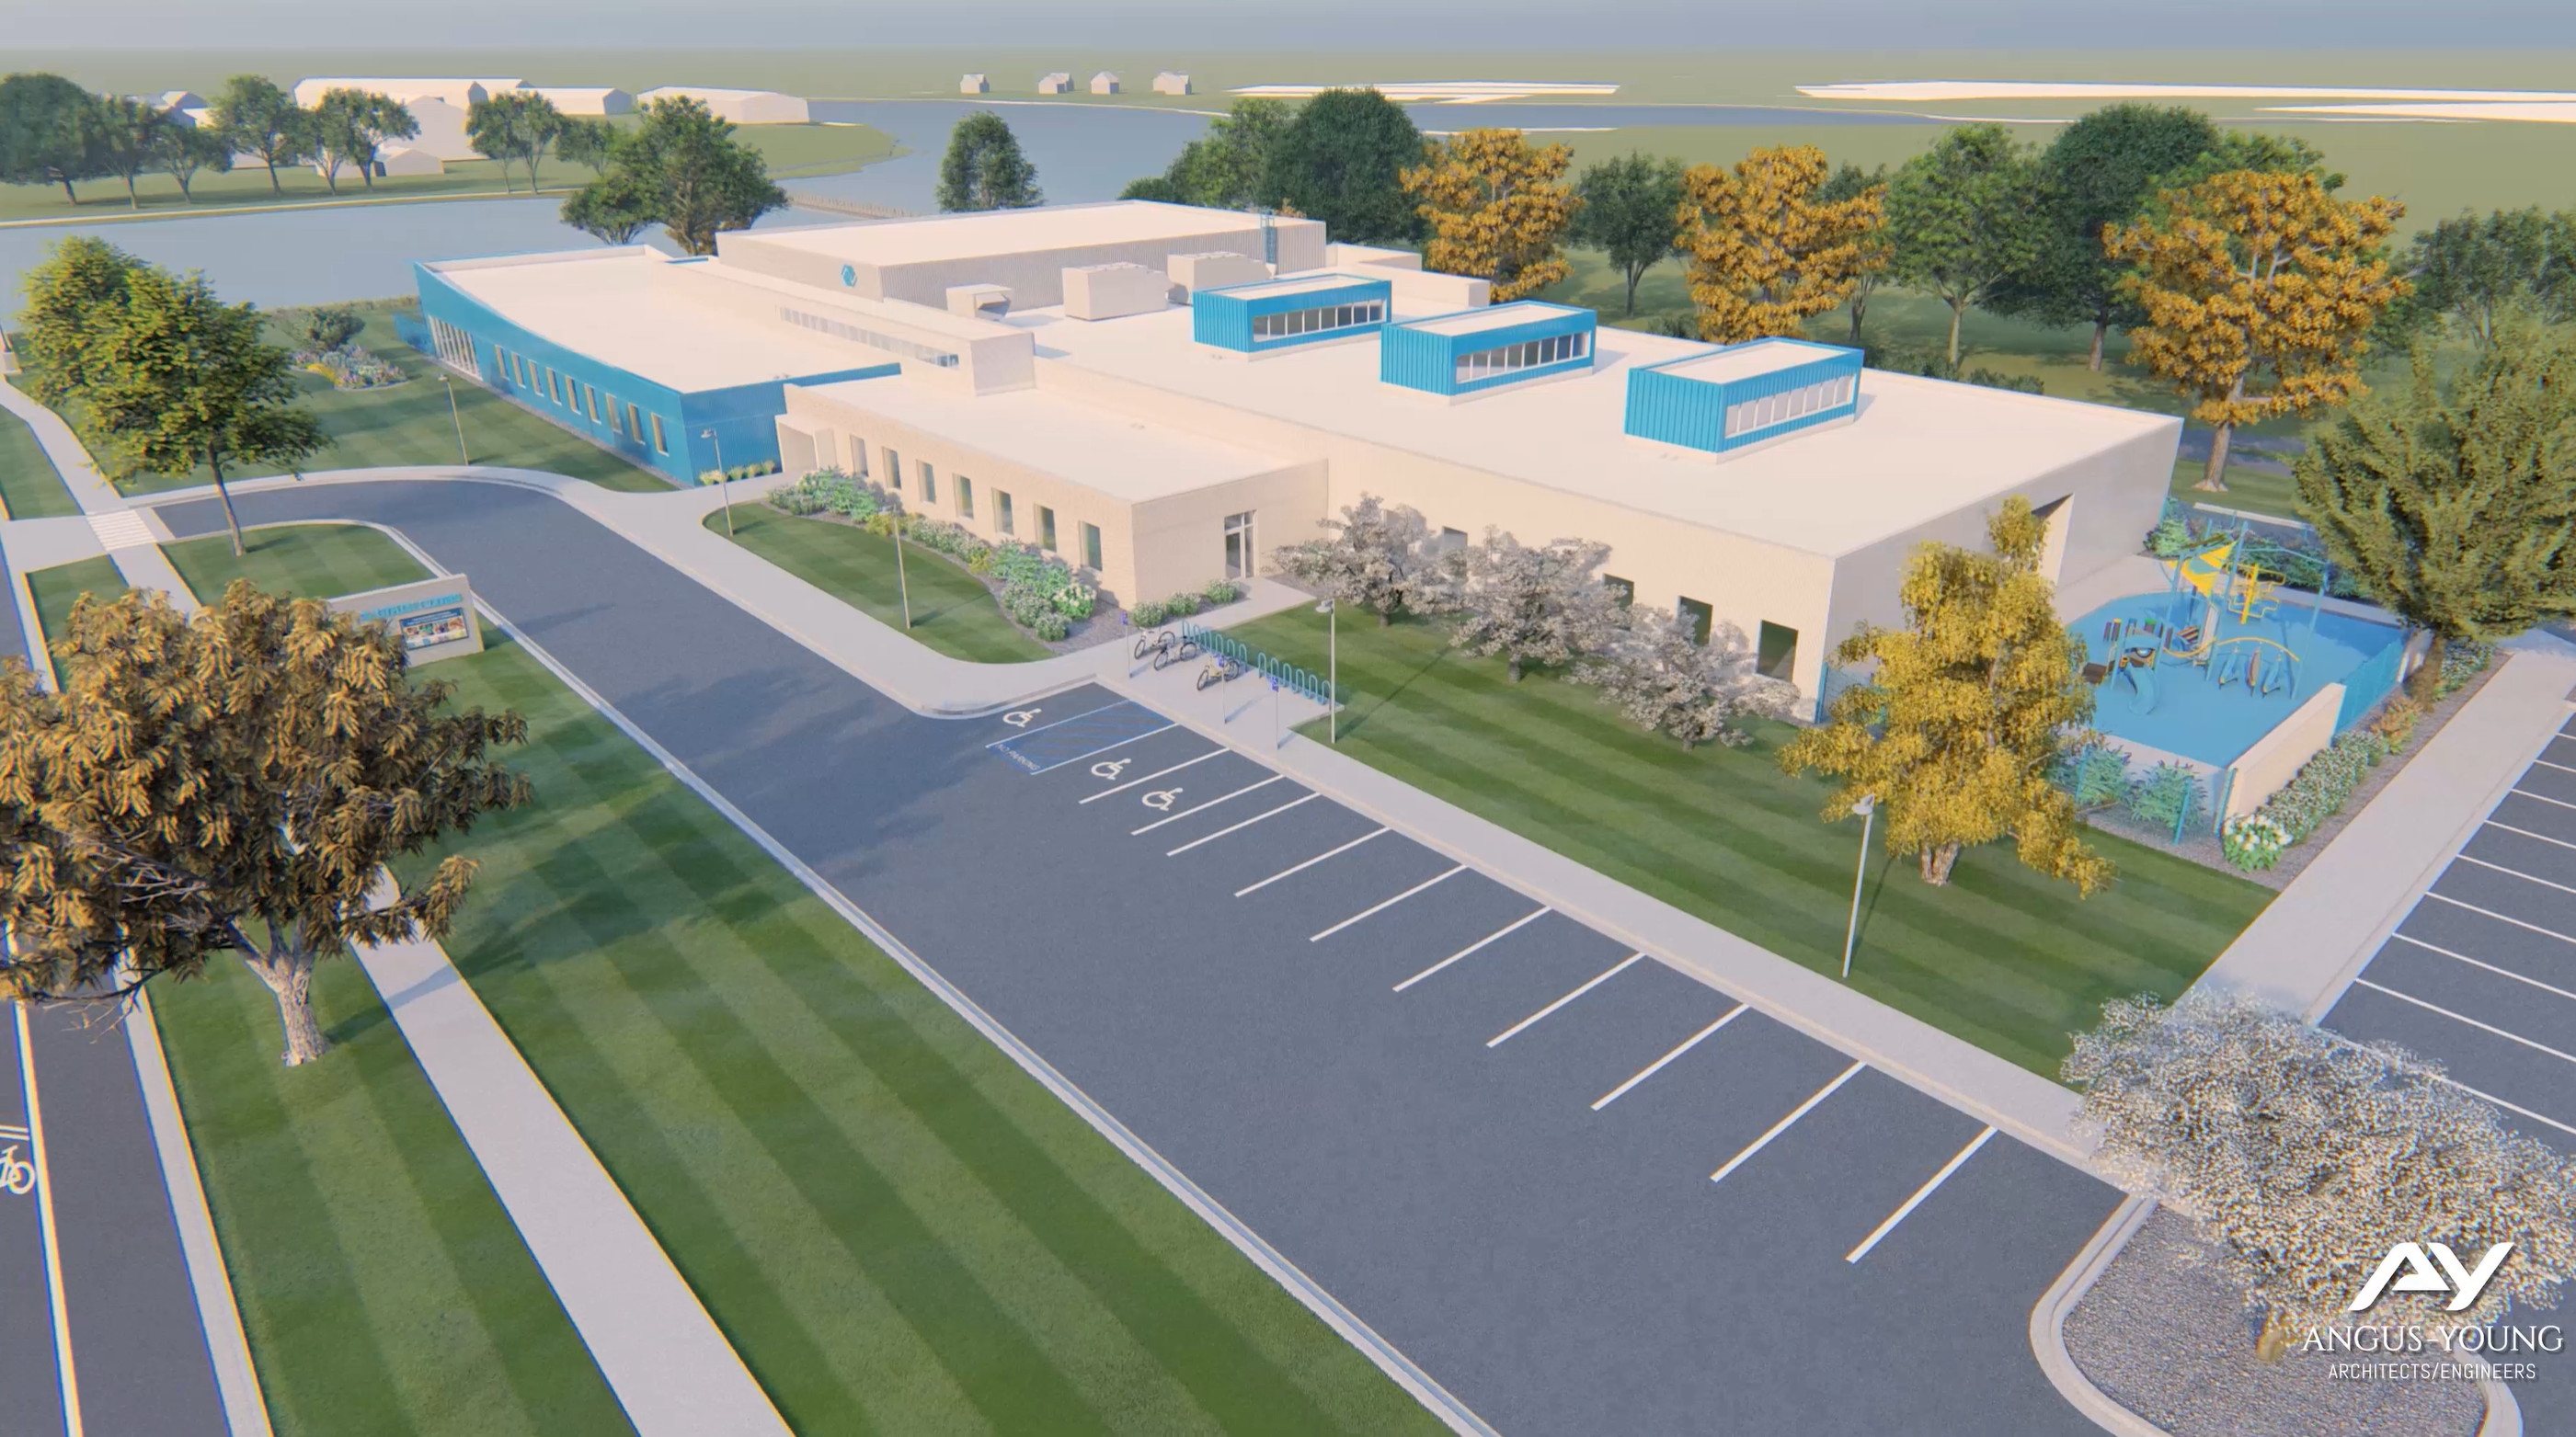 Proposed new boys and girls club of Janesville facility